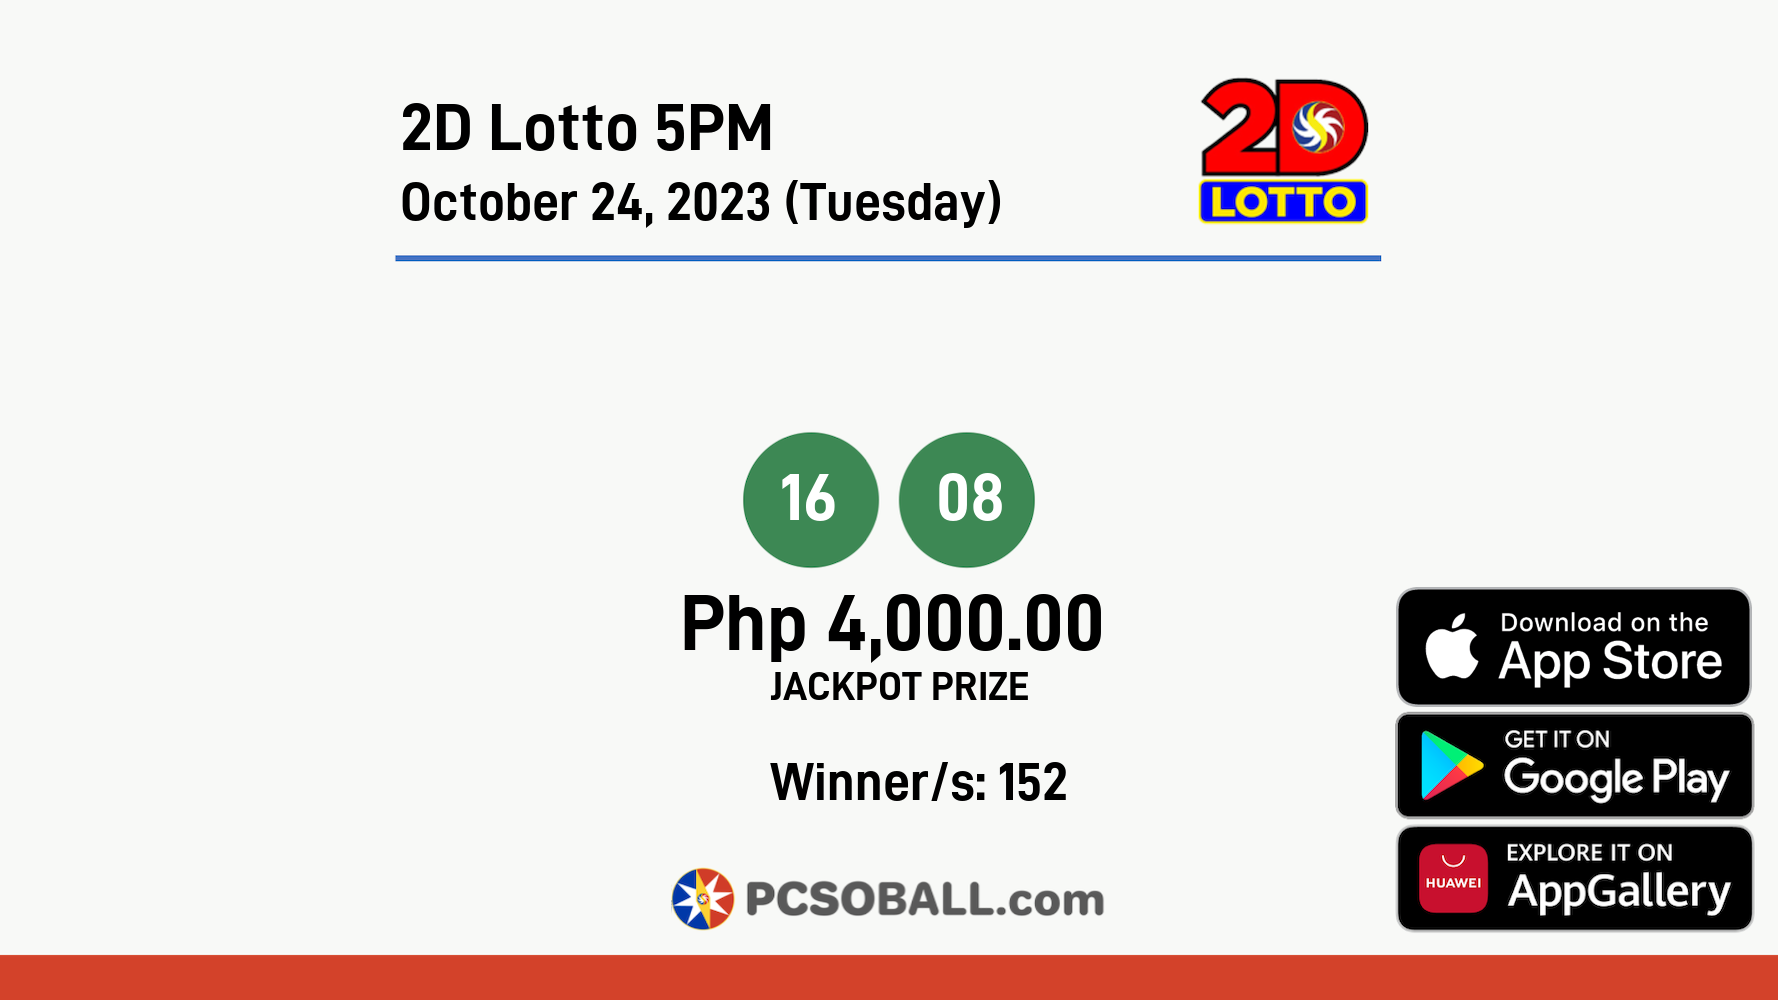 2D Lotto 5PM October 24, 2023 (Tuesday) Result